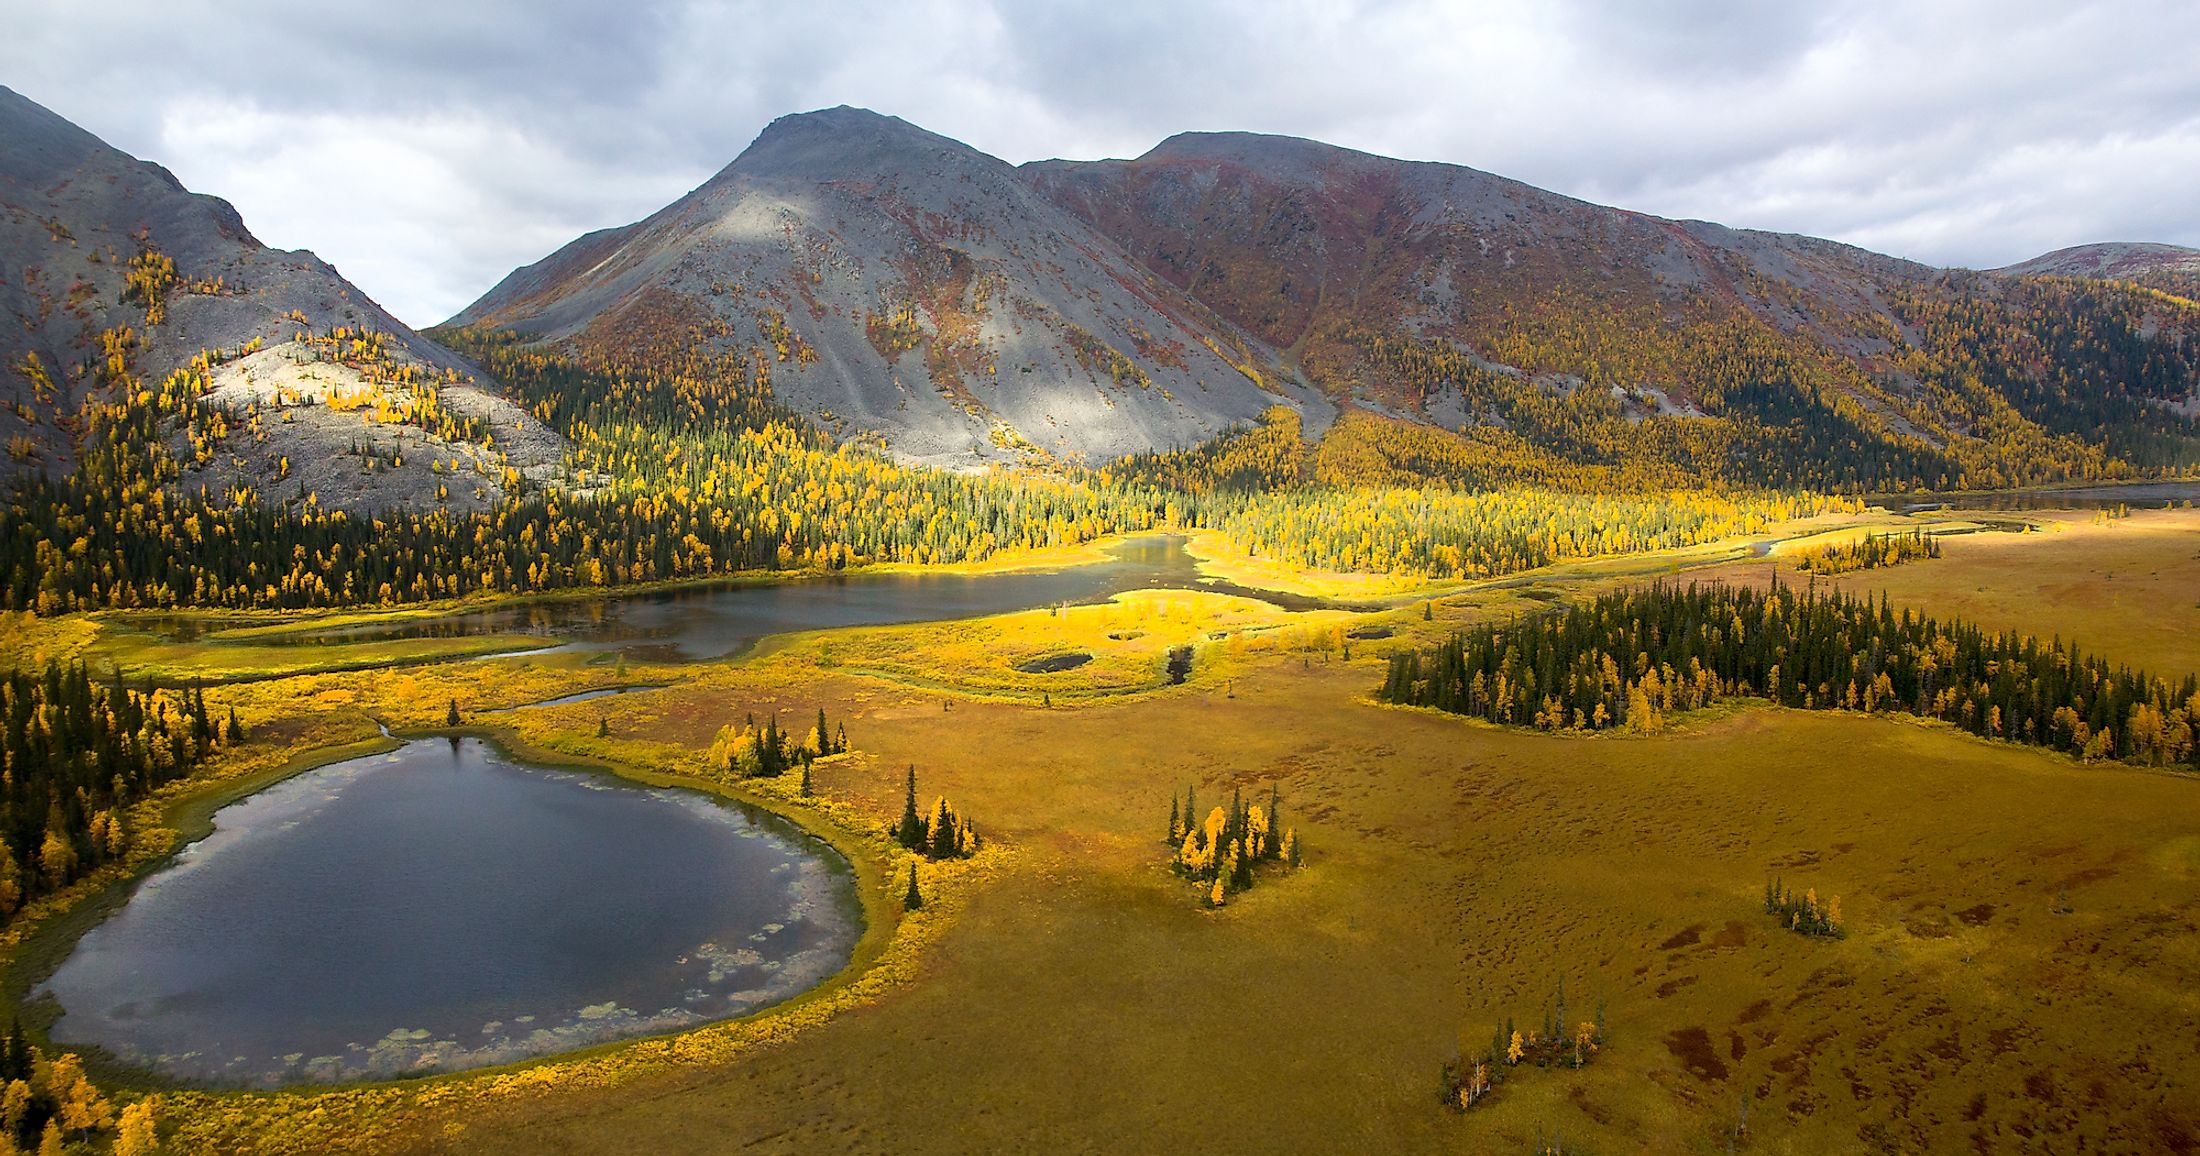 The spectacular landscape of the Ural Mountains.